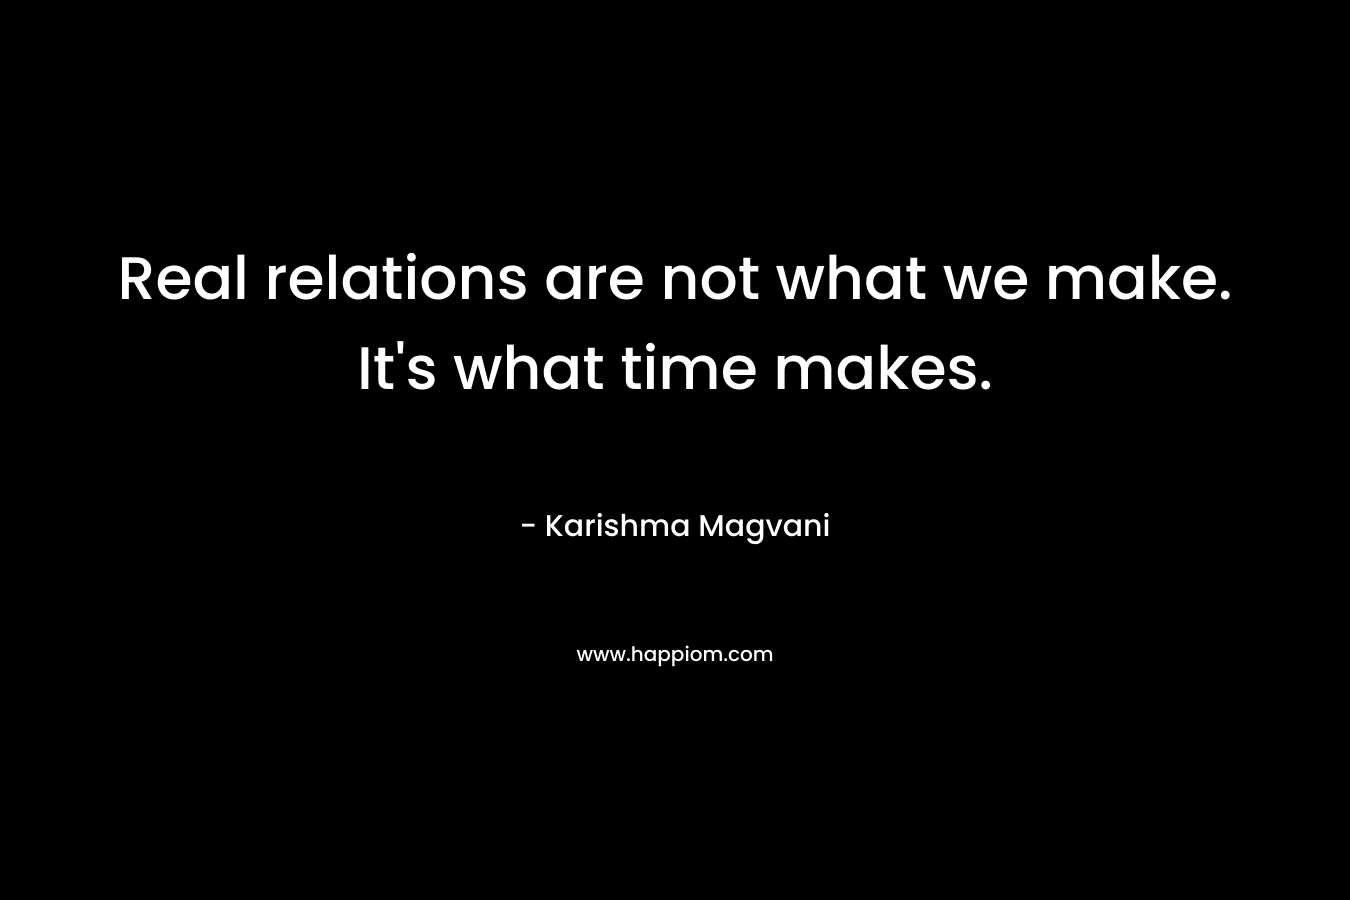 Real relations are not what we make. It's what time makes.